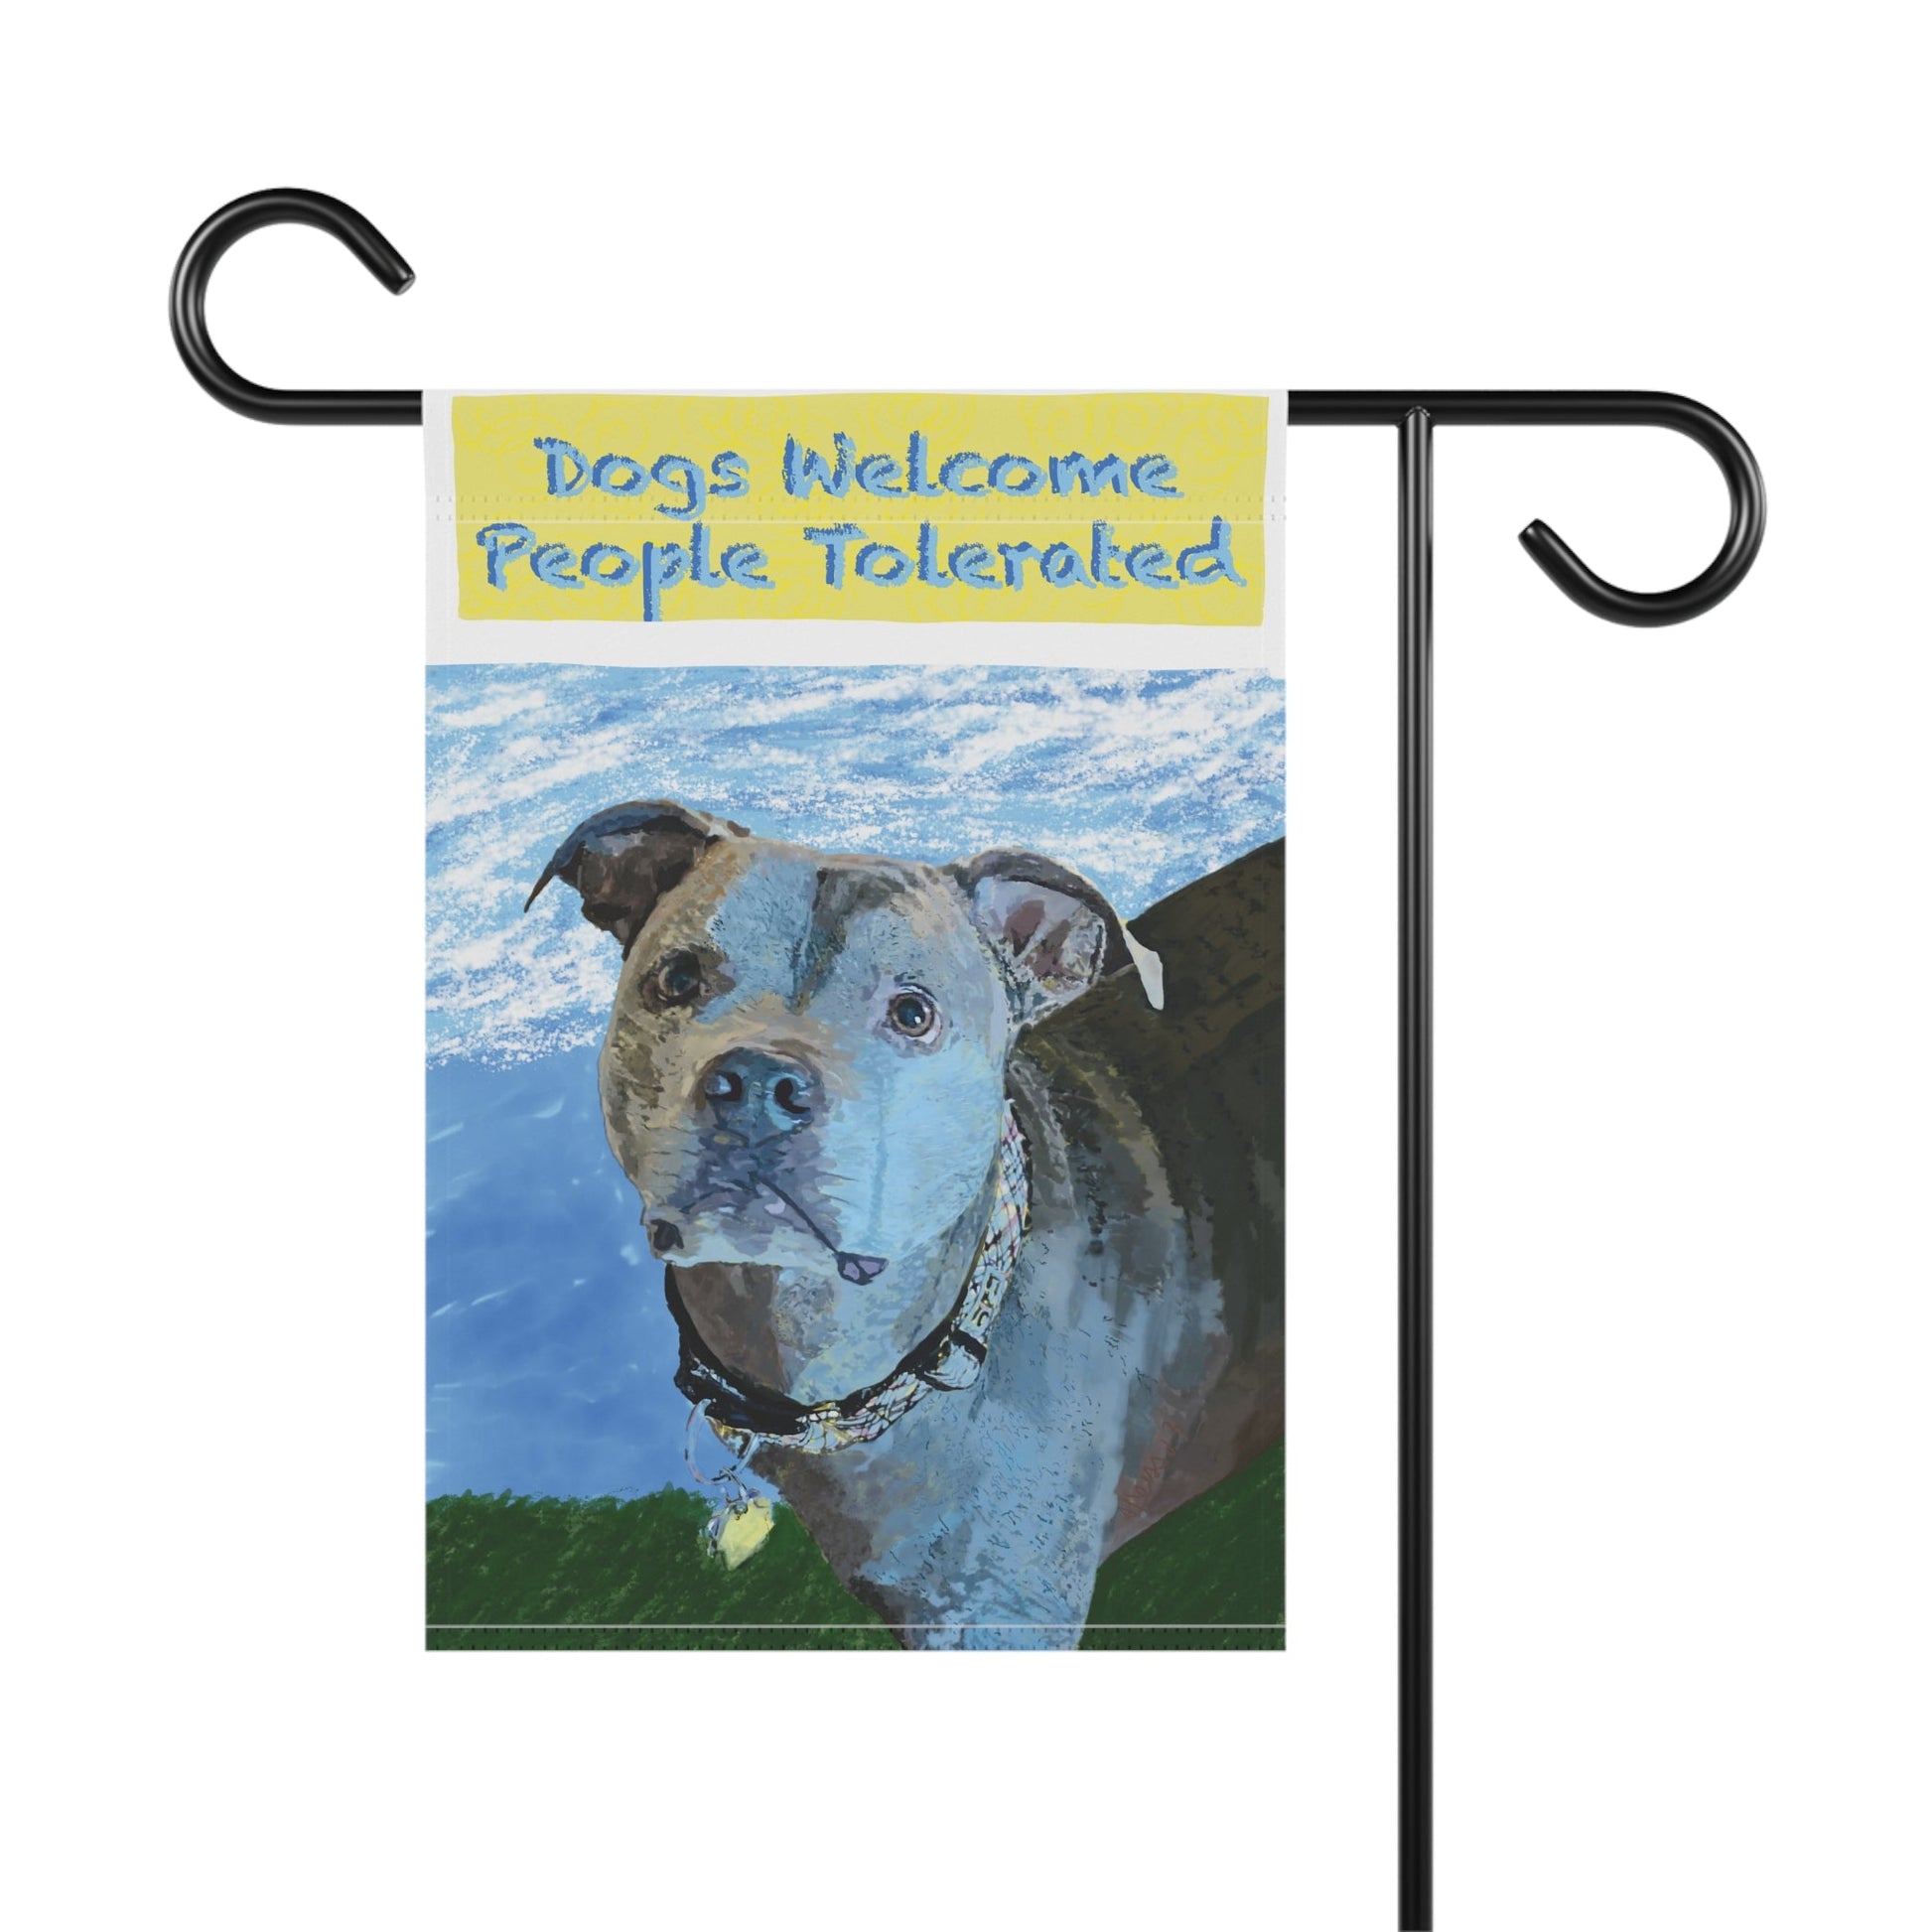 Dogs Welcome People Tolerated Garden & House Banner - Blue Cava